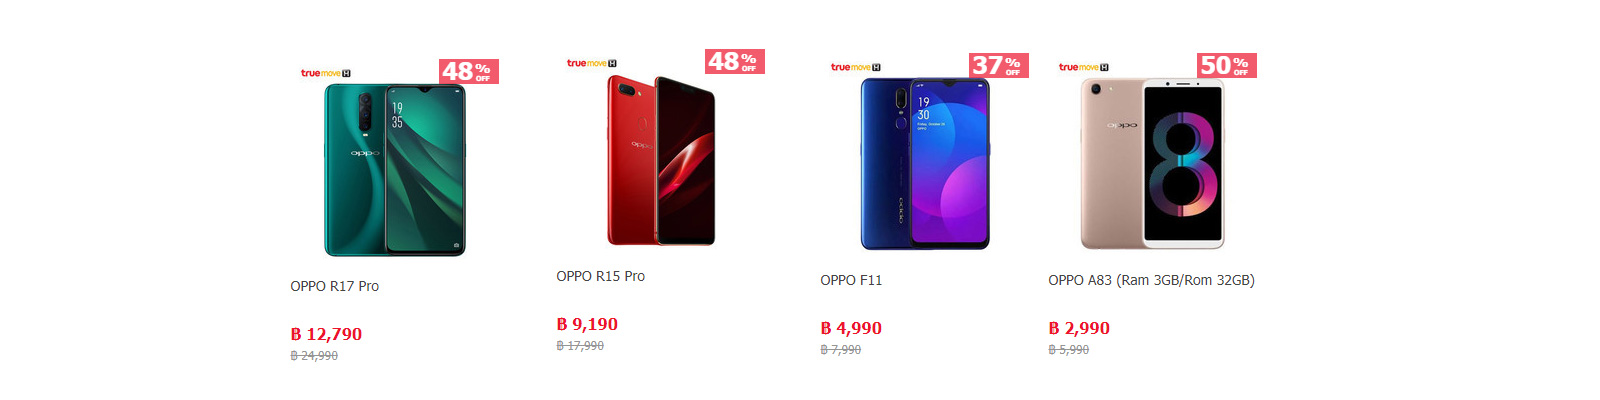 wemall-promotion-oppo